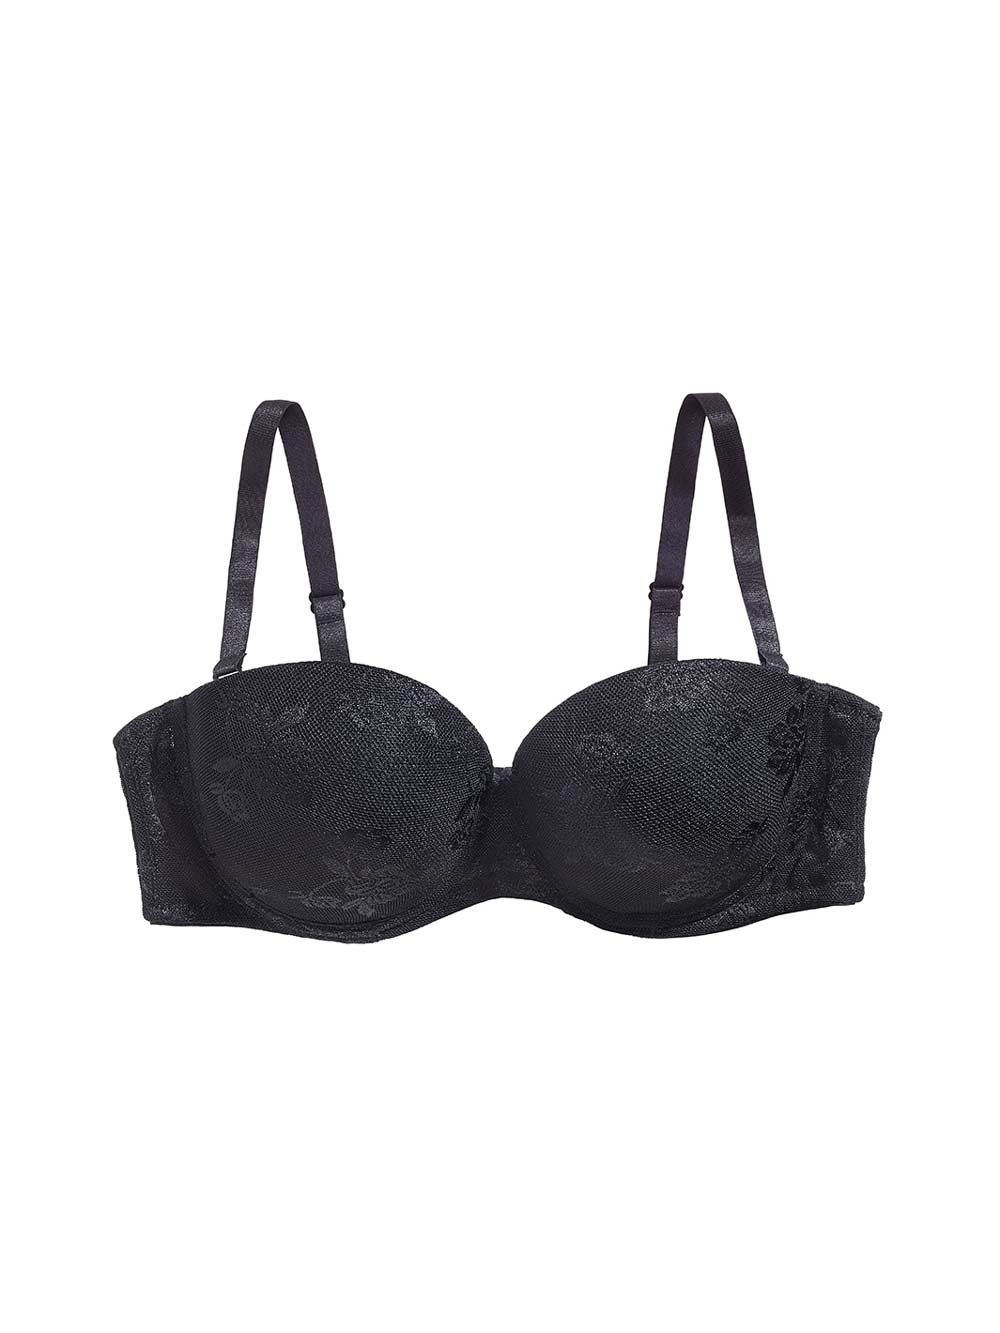 Ashly Lace Bra, Petite, Push-up, Demi-Cup, Small Sizes